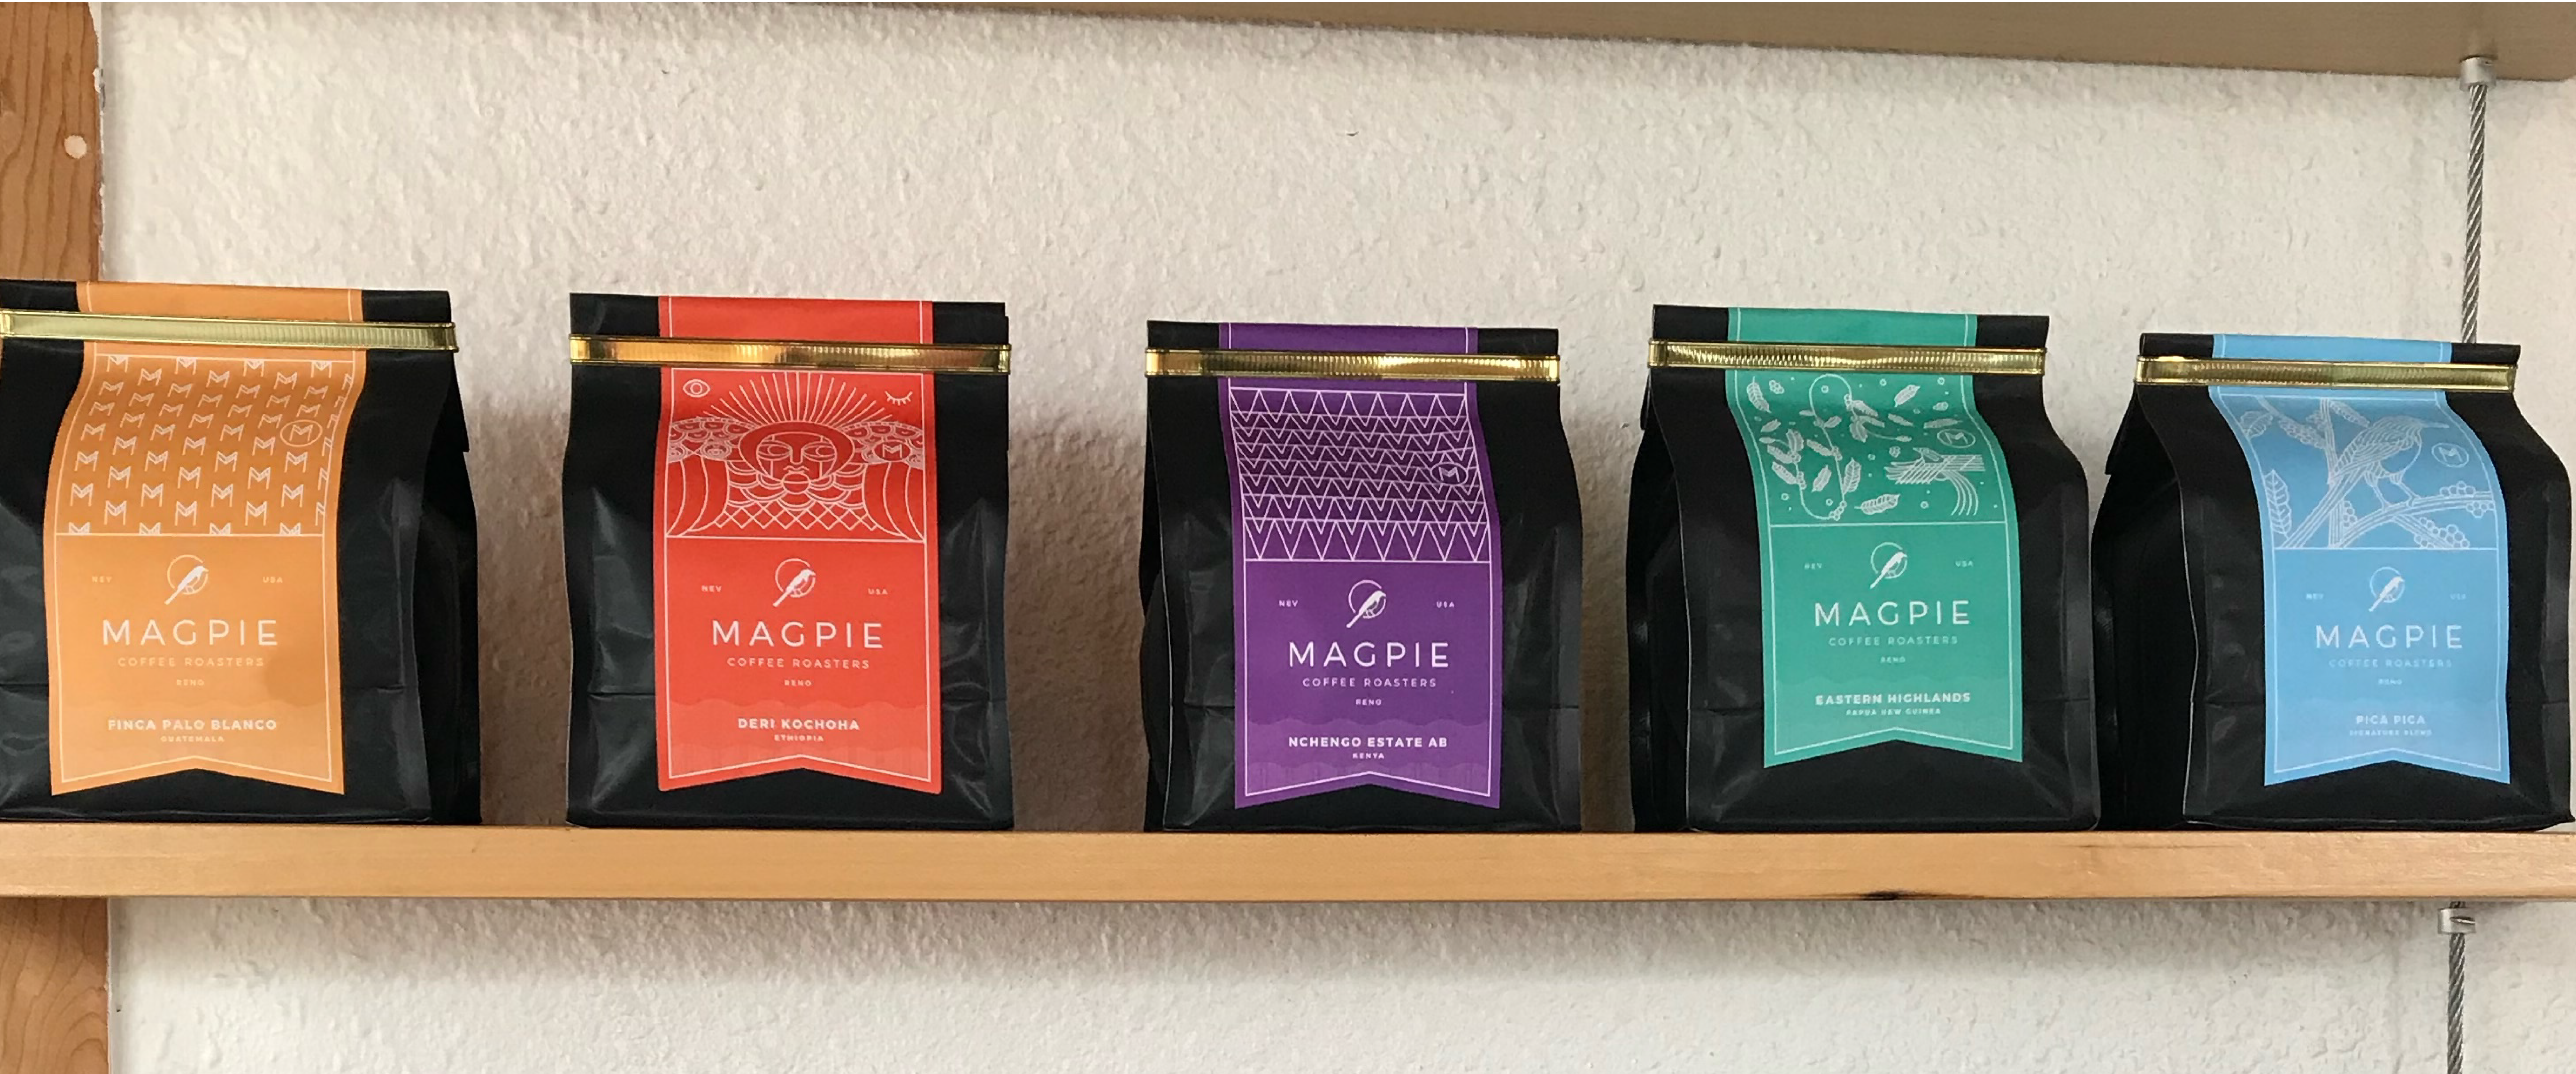 Photo of Magpie coffee beans on shelves